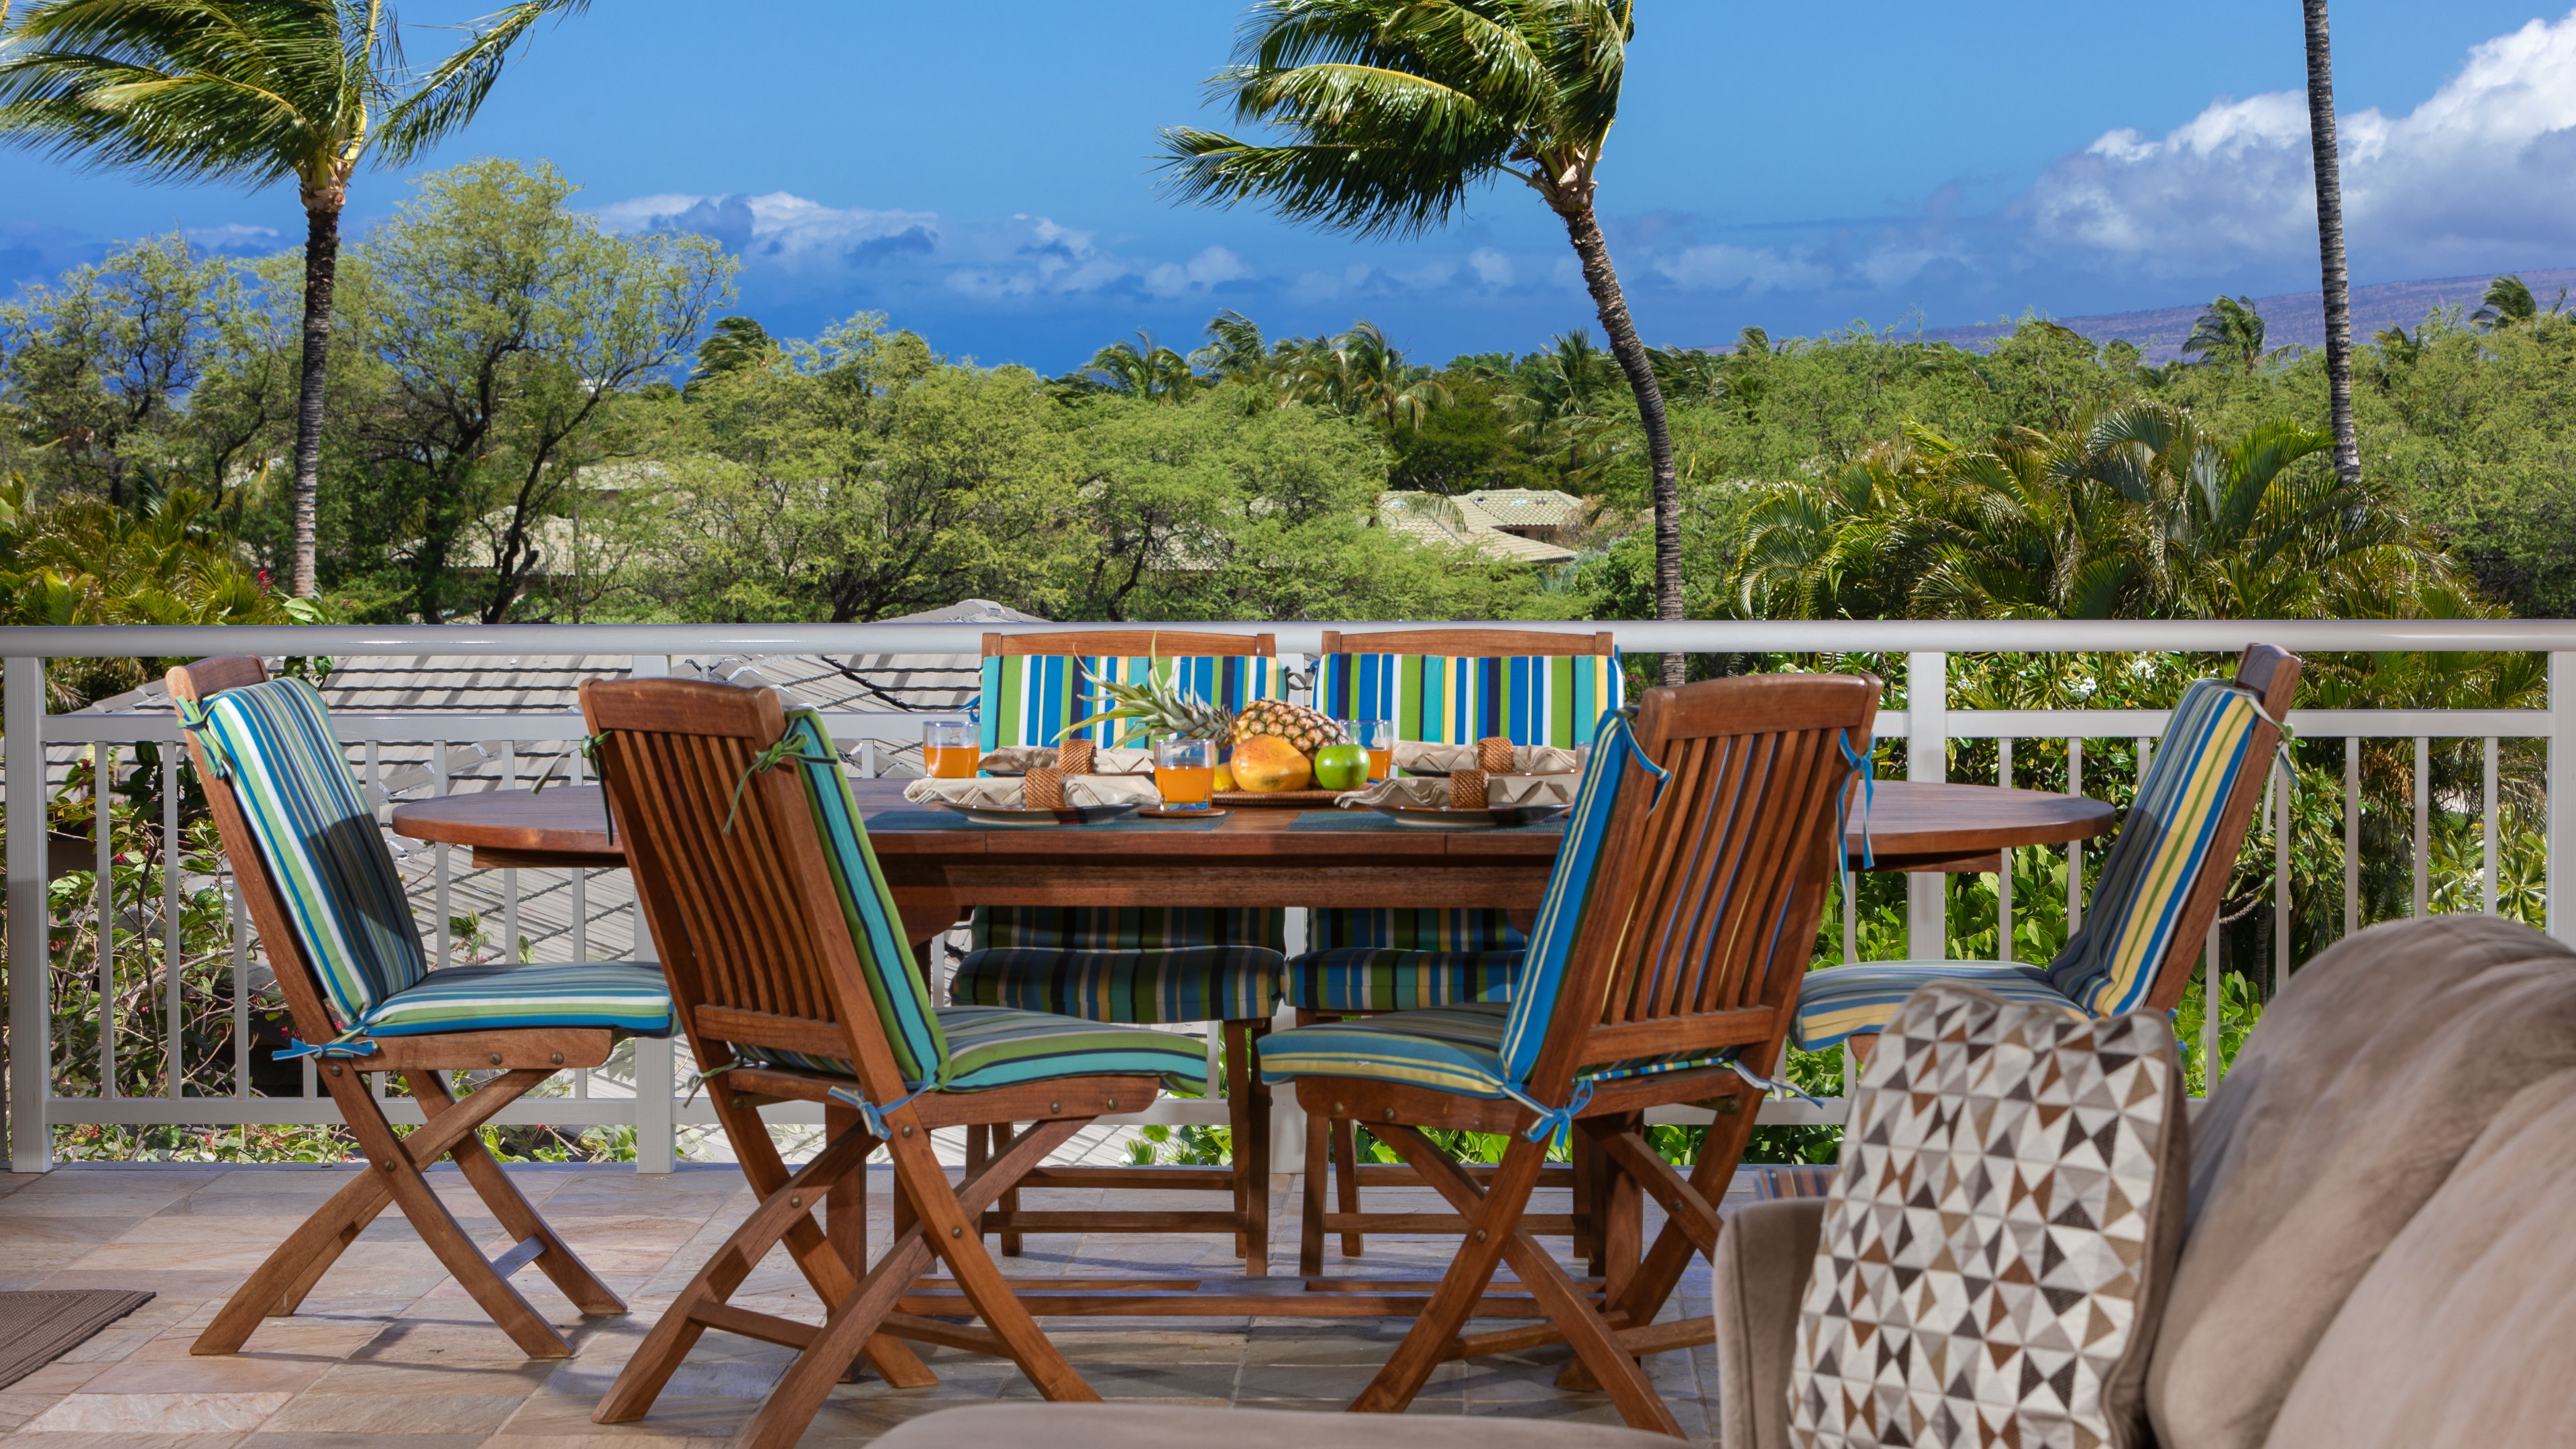 Welcome to Sunset Villa in the gorgeous Villages community at the Mauna Lani Resort